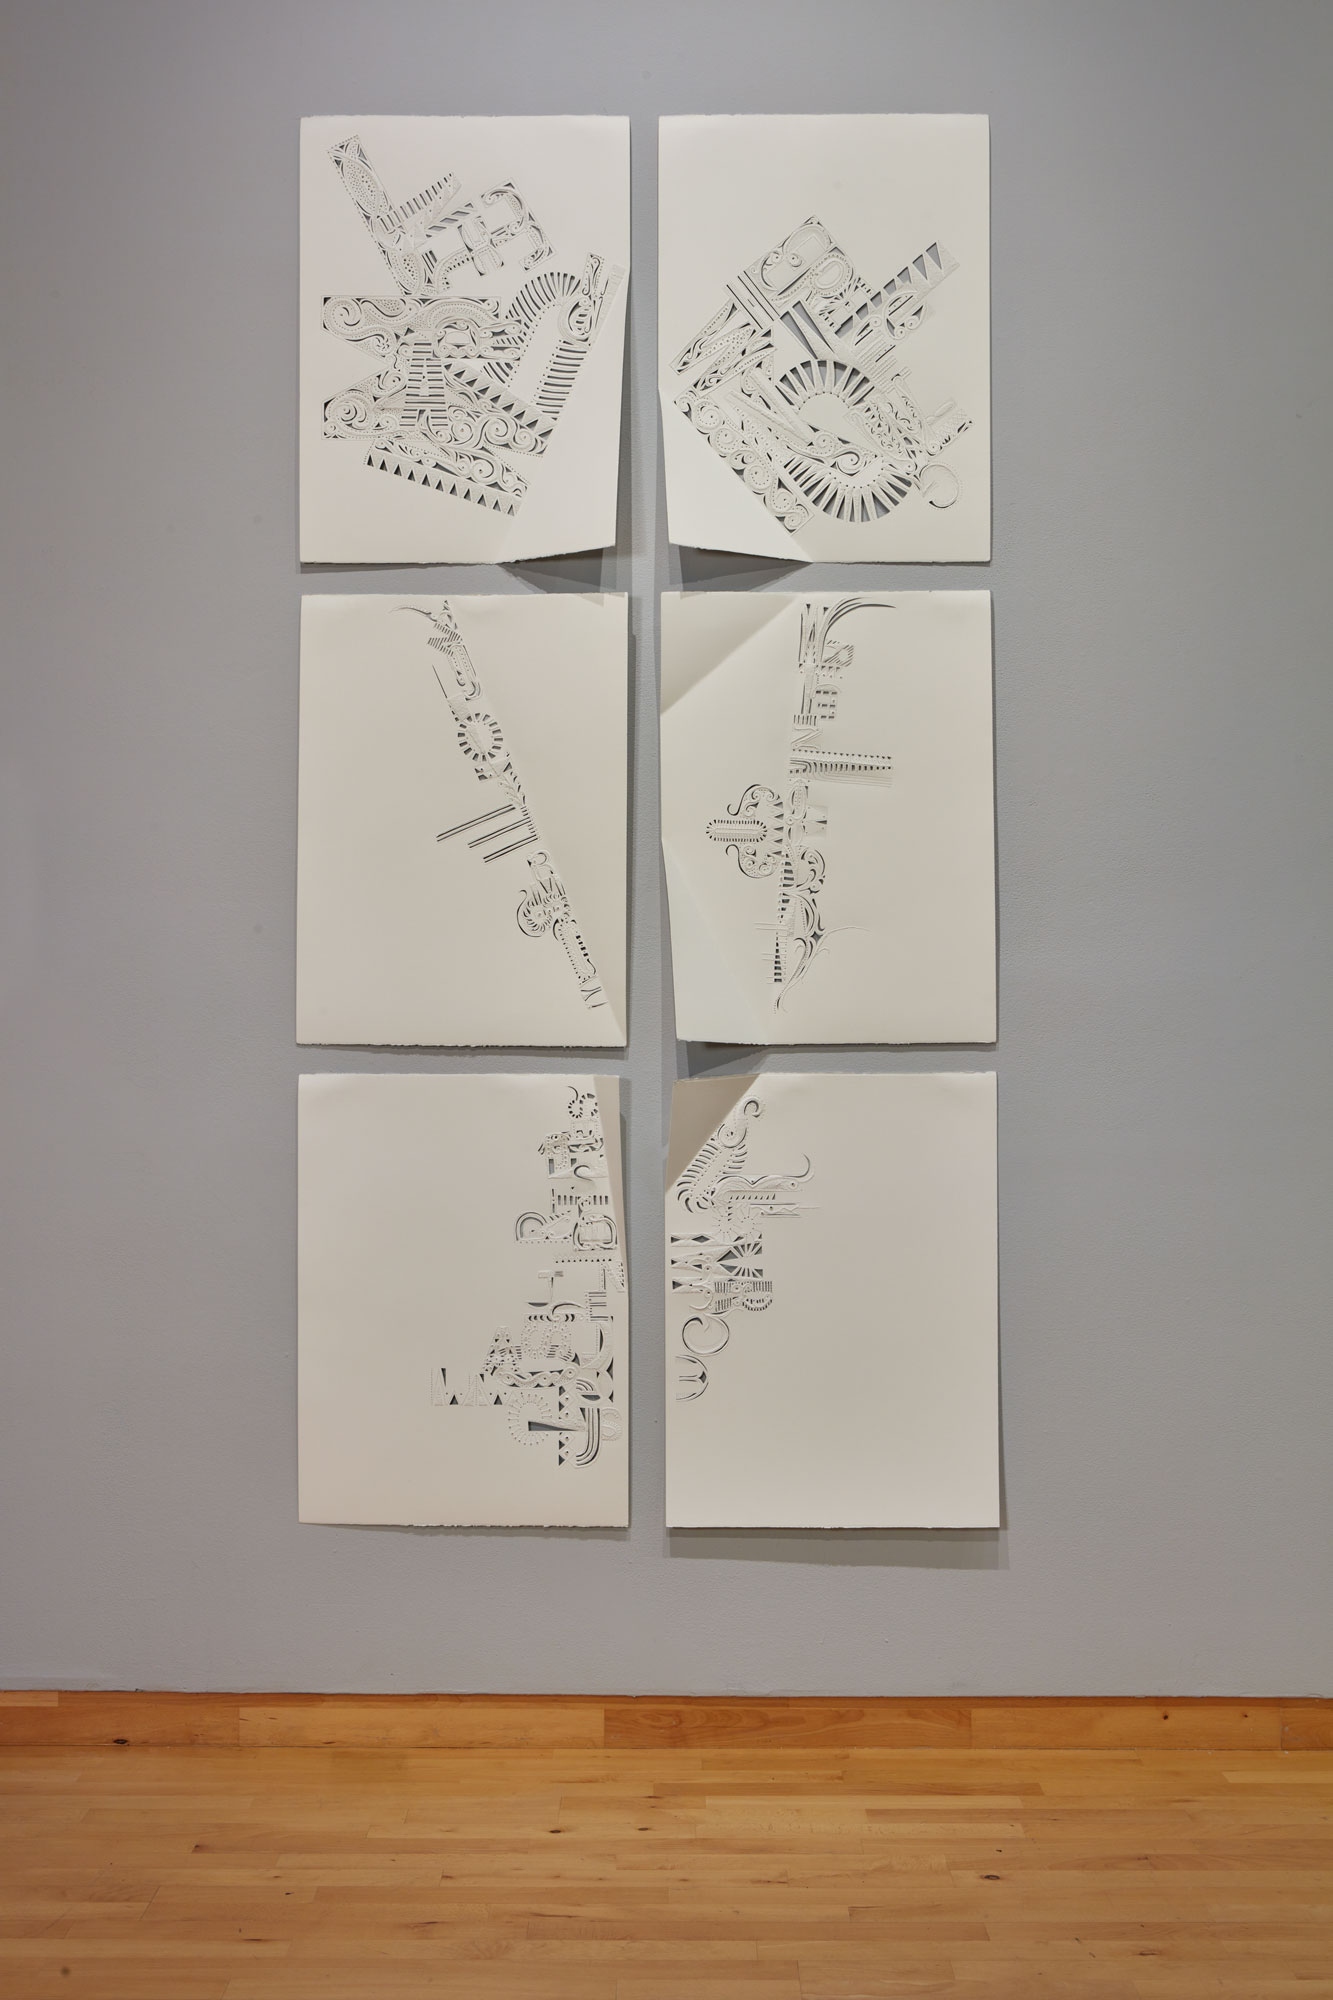 Rosemarie Chiarlone, In the Marrow, 2019. folded and perforated paper. text by poet Susan Weiner. 30 x 22 in., each of six panels; 66 x 46 x 4 in. as installed. Courtesy of the artist. Installation view of Skyway 20/21 exhibition at USF Contemporary Art Museum. Photo: Will Lytch.